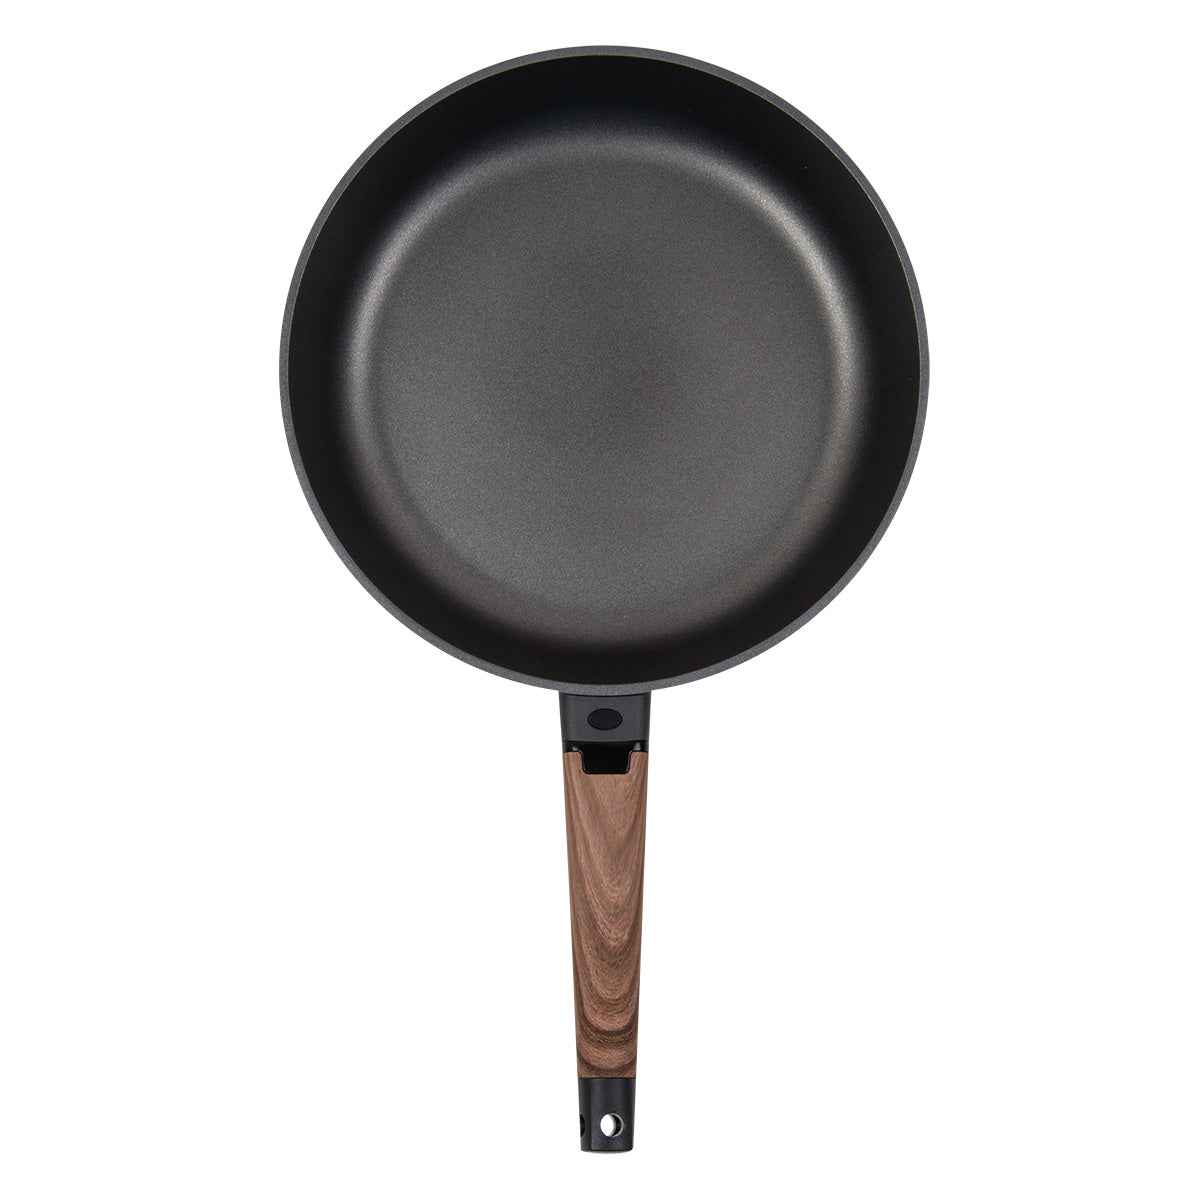 MasterPan MP-183 11 in. Griddle & Pancake Pan - Non-Stick Aluminium Cookware with Stainless Steel Chefs Handle